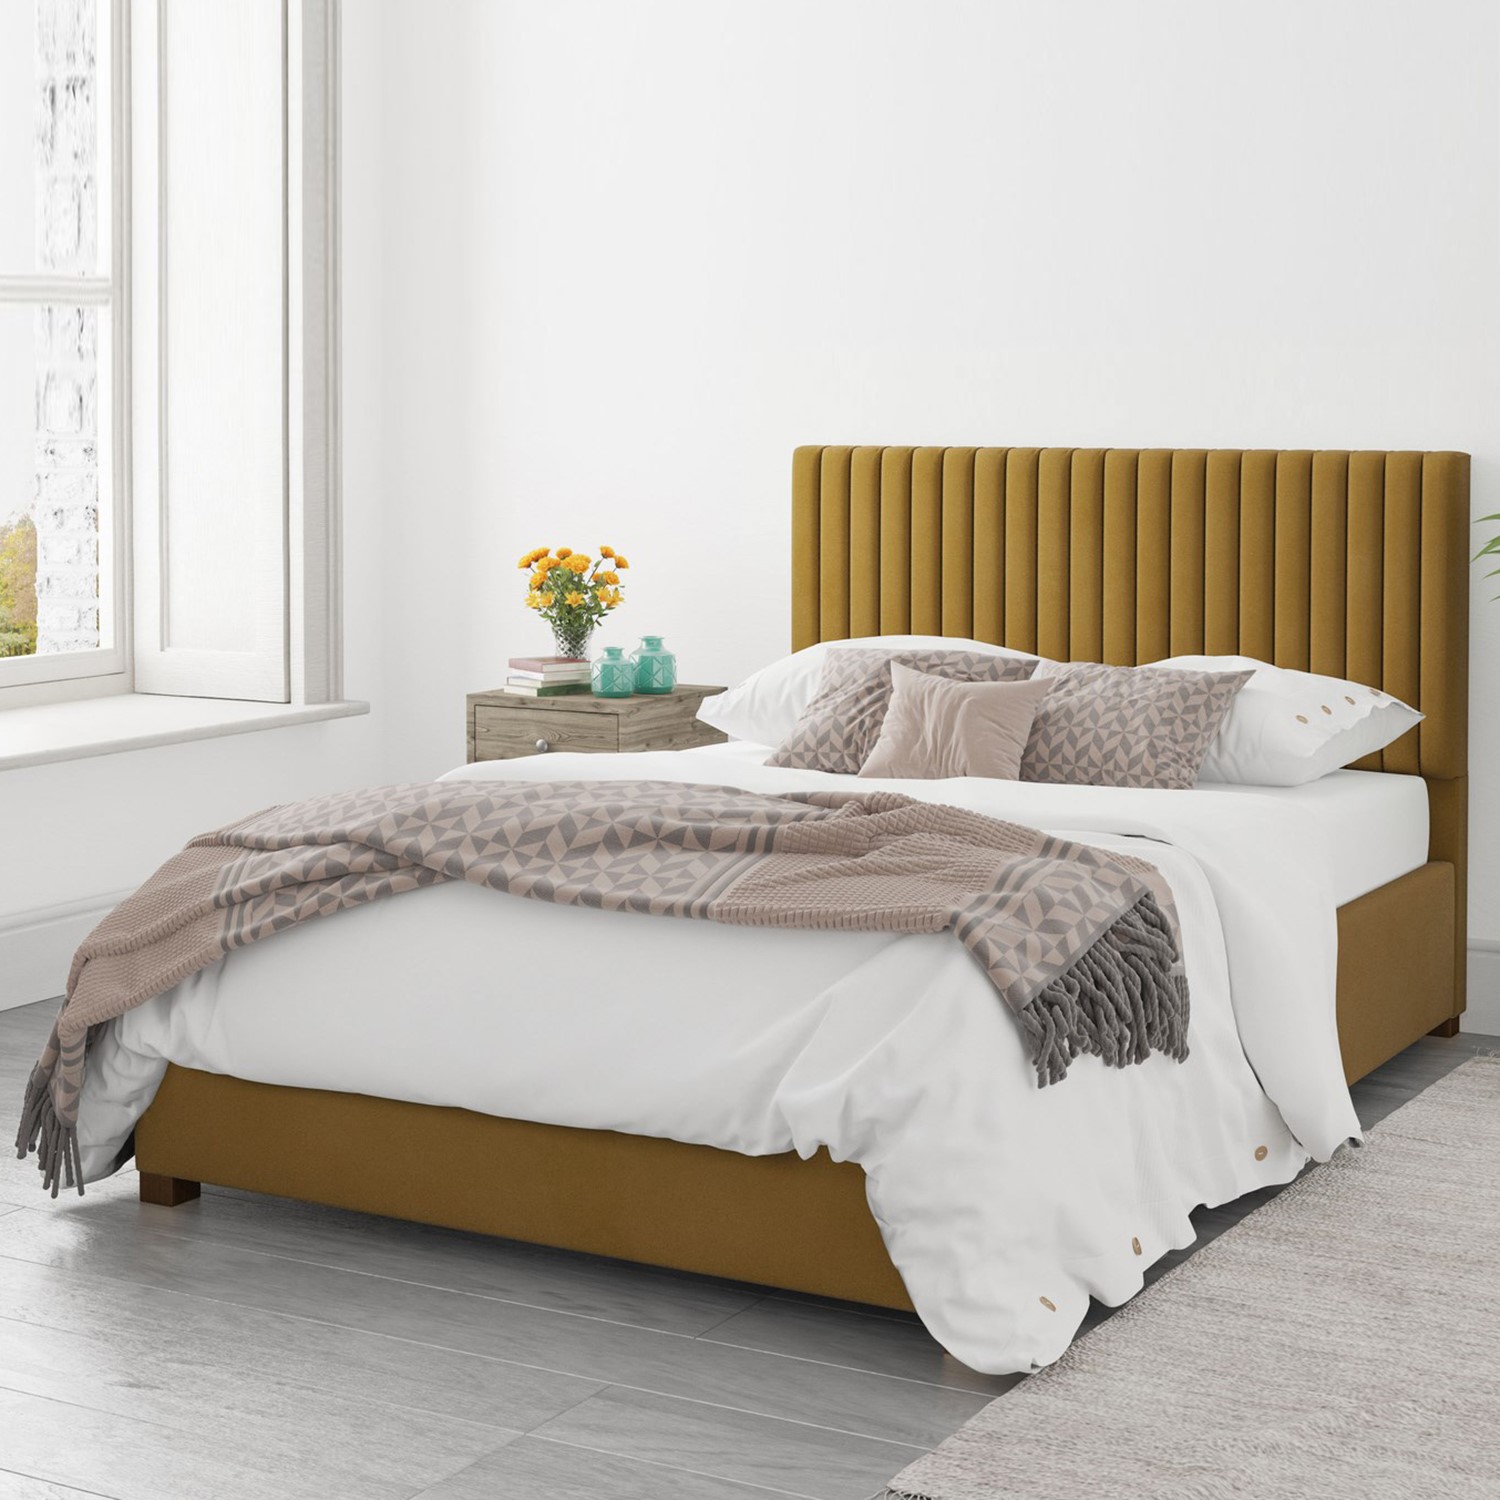 Read more about Mustard velvet super king size ottoman bed piccadilly aspire